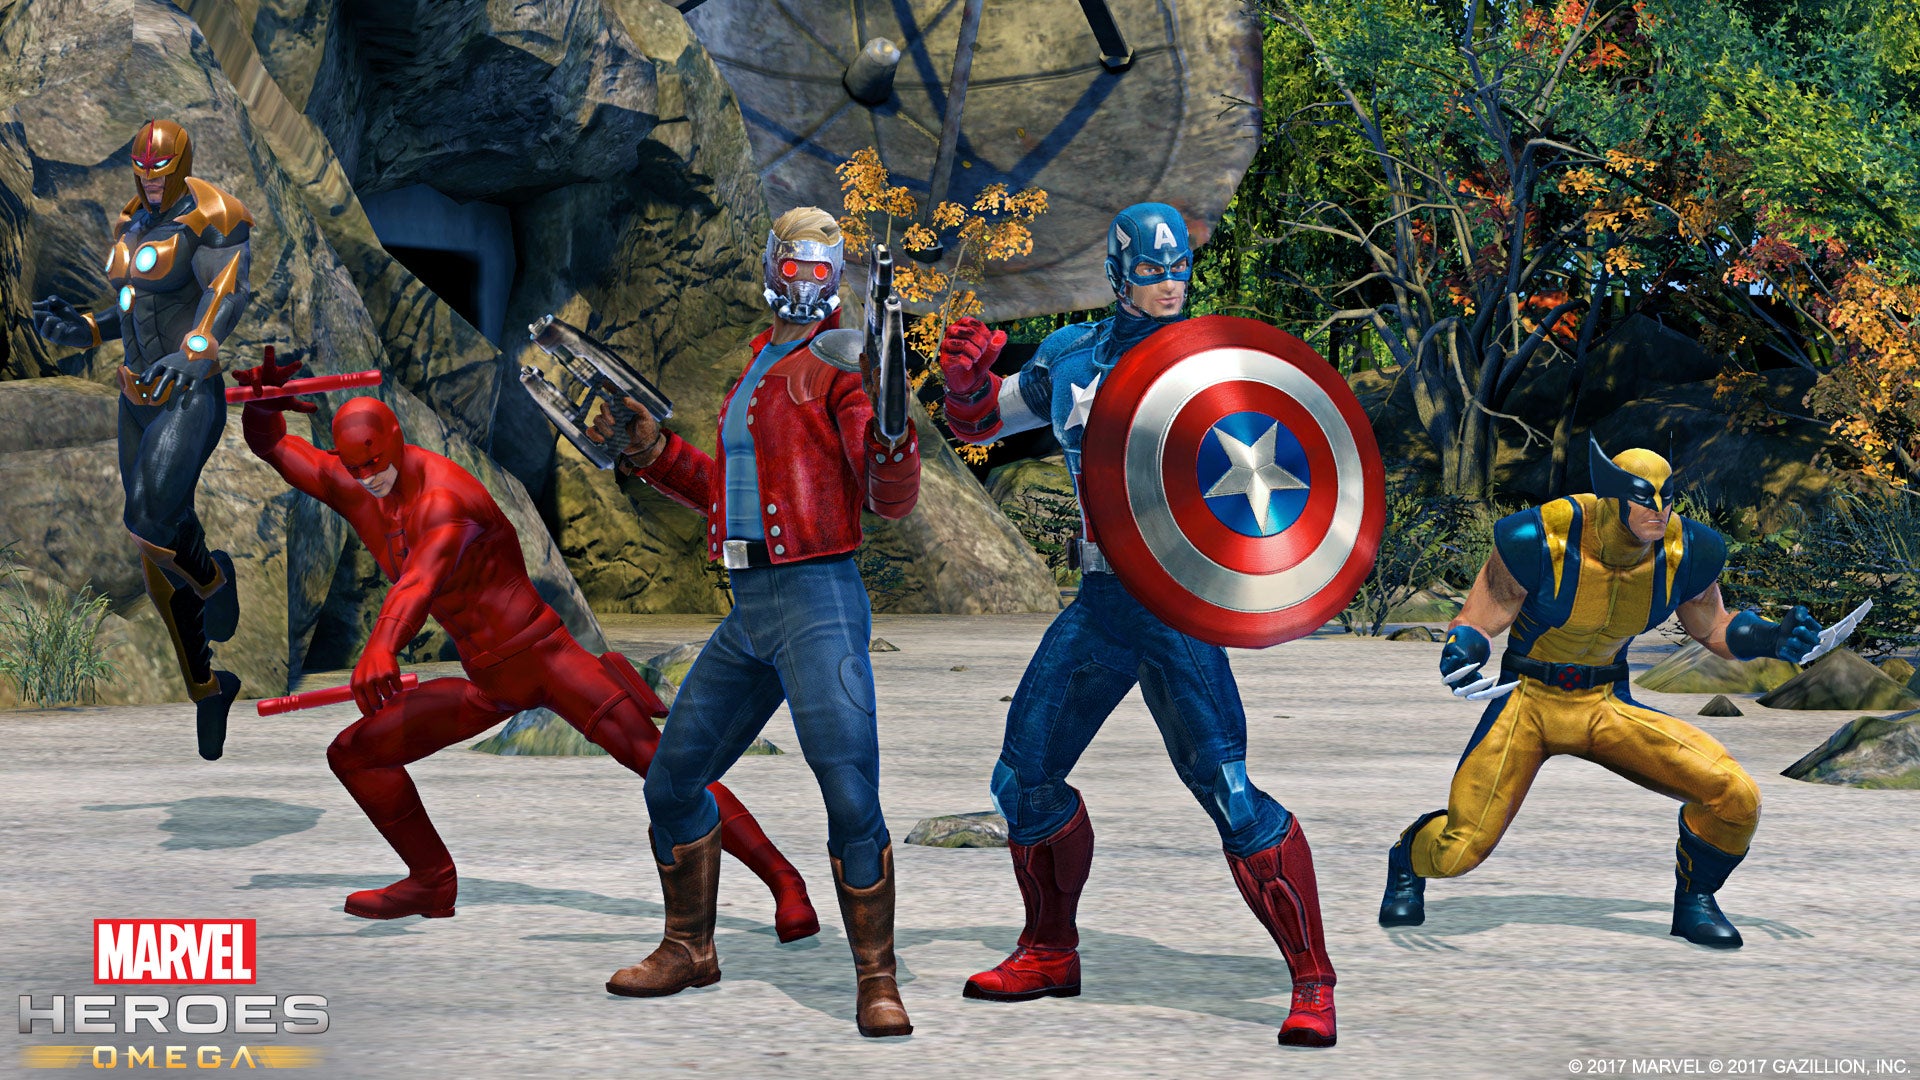 Image for Stomping supervillains in Marvel Heroes Omega is my latest casual addiction